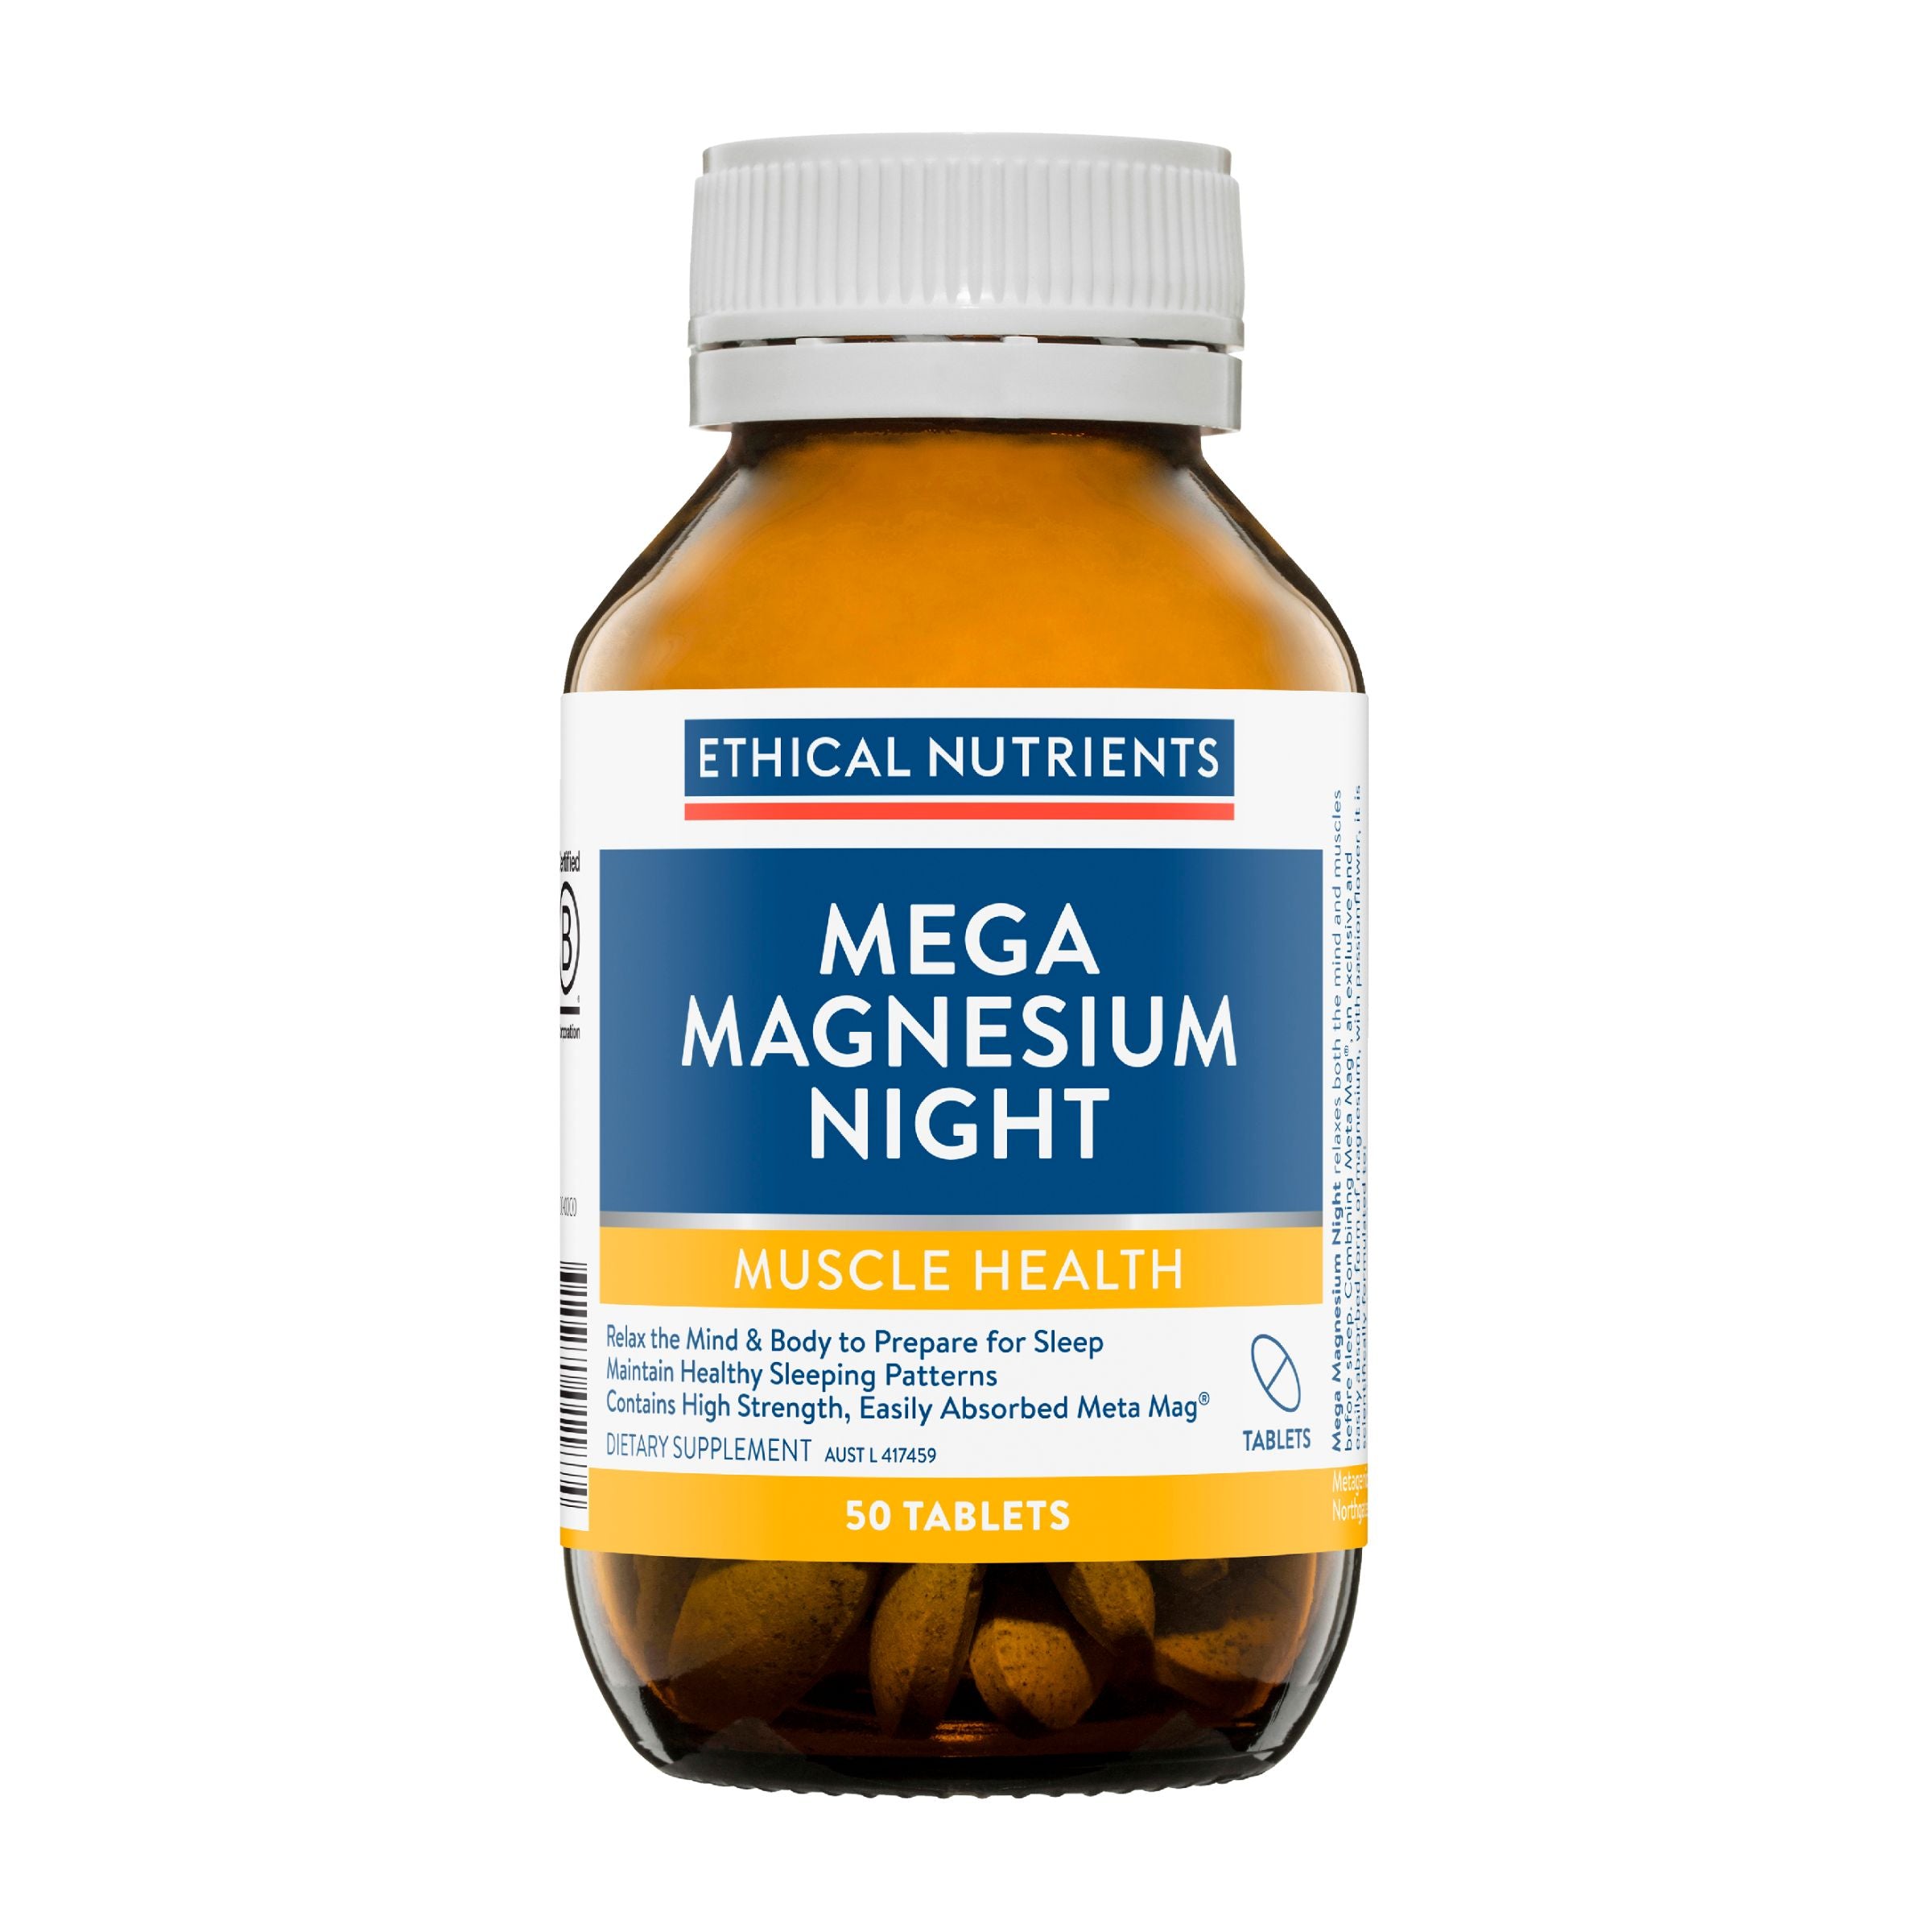 Ethical Nutrients Mega Magnesium Night 50 Tablets #size_50 tablets